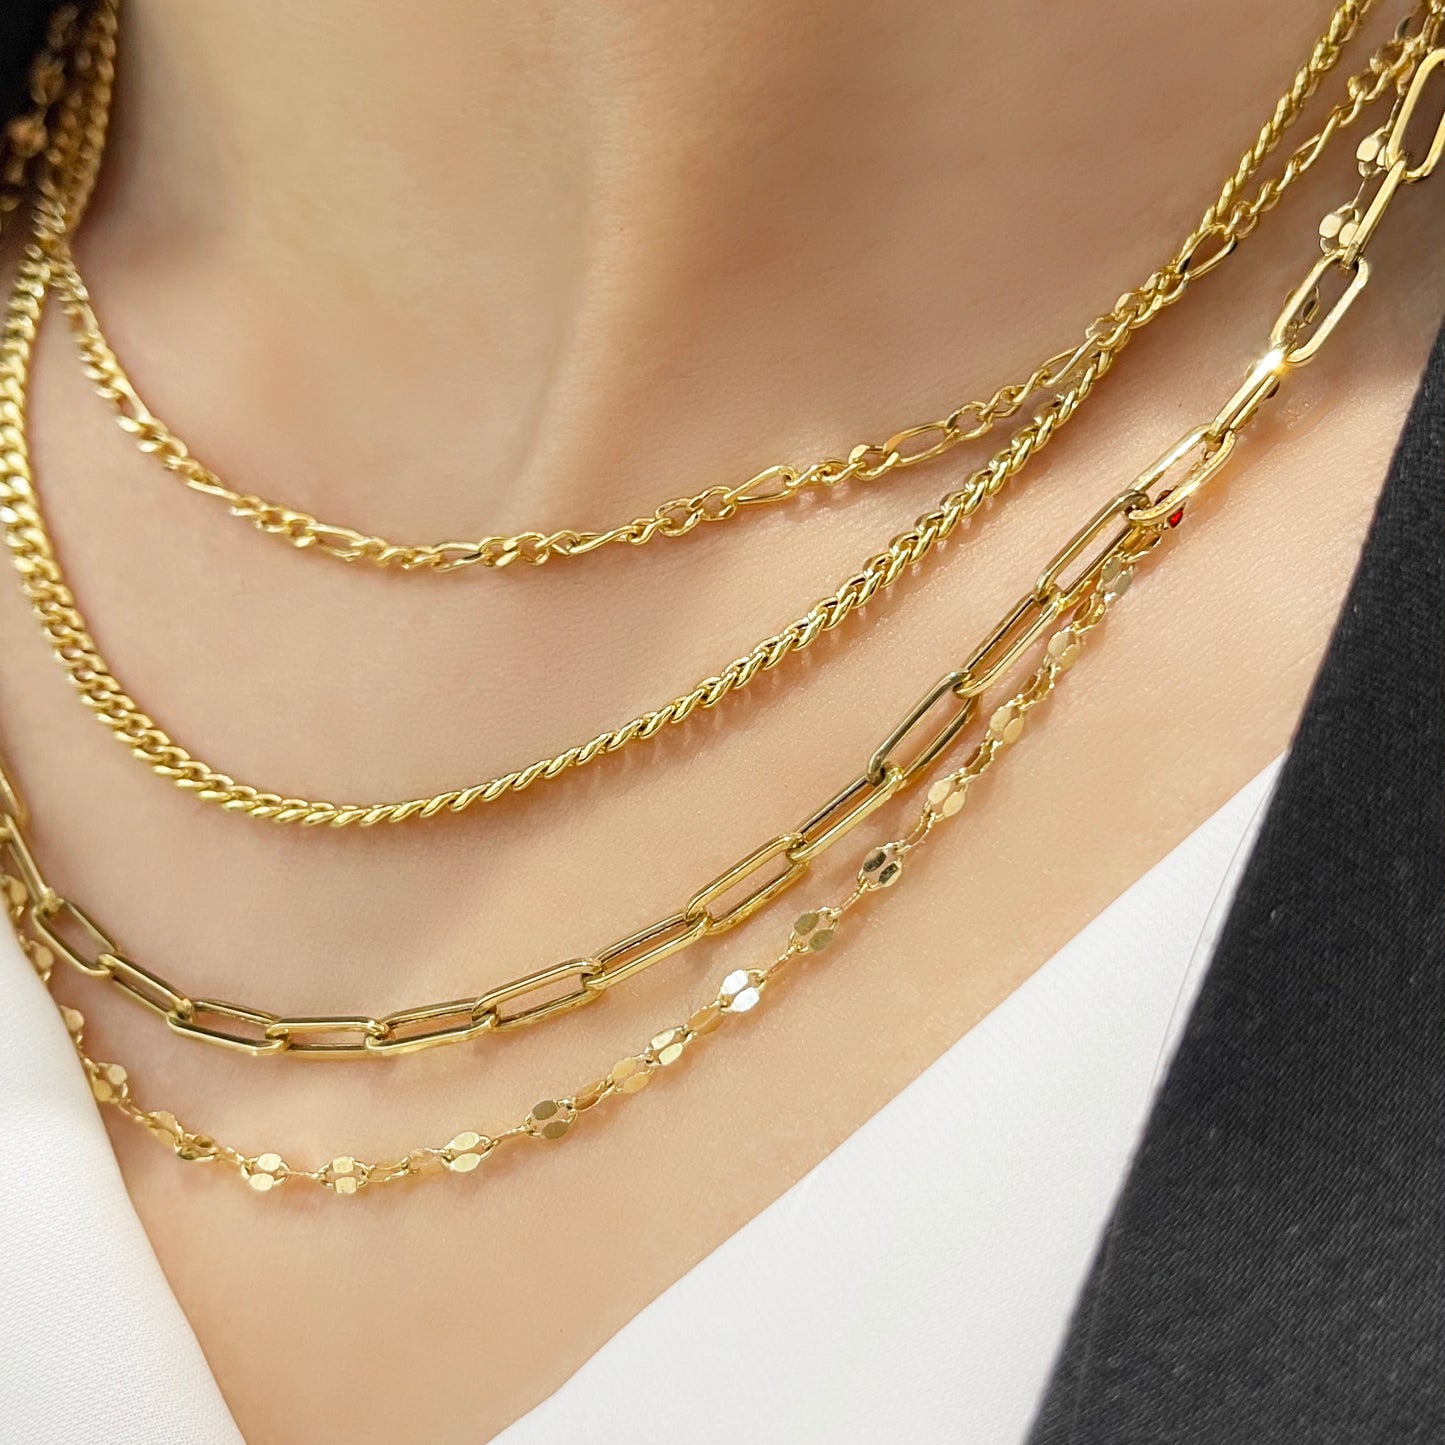 18k黃金古巴頸鏈 18k Yellow Gold 2.9mm Cuban Chain Necklace